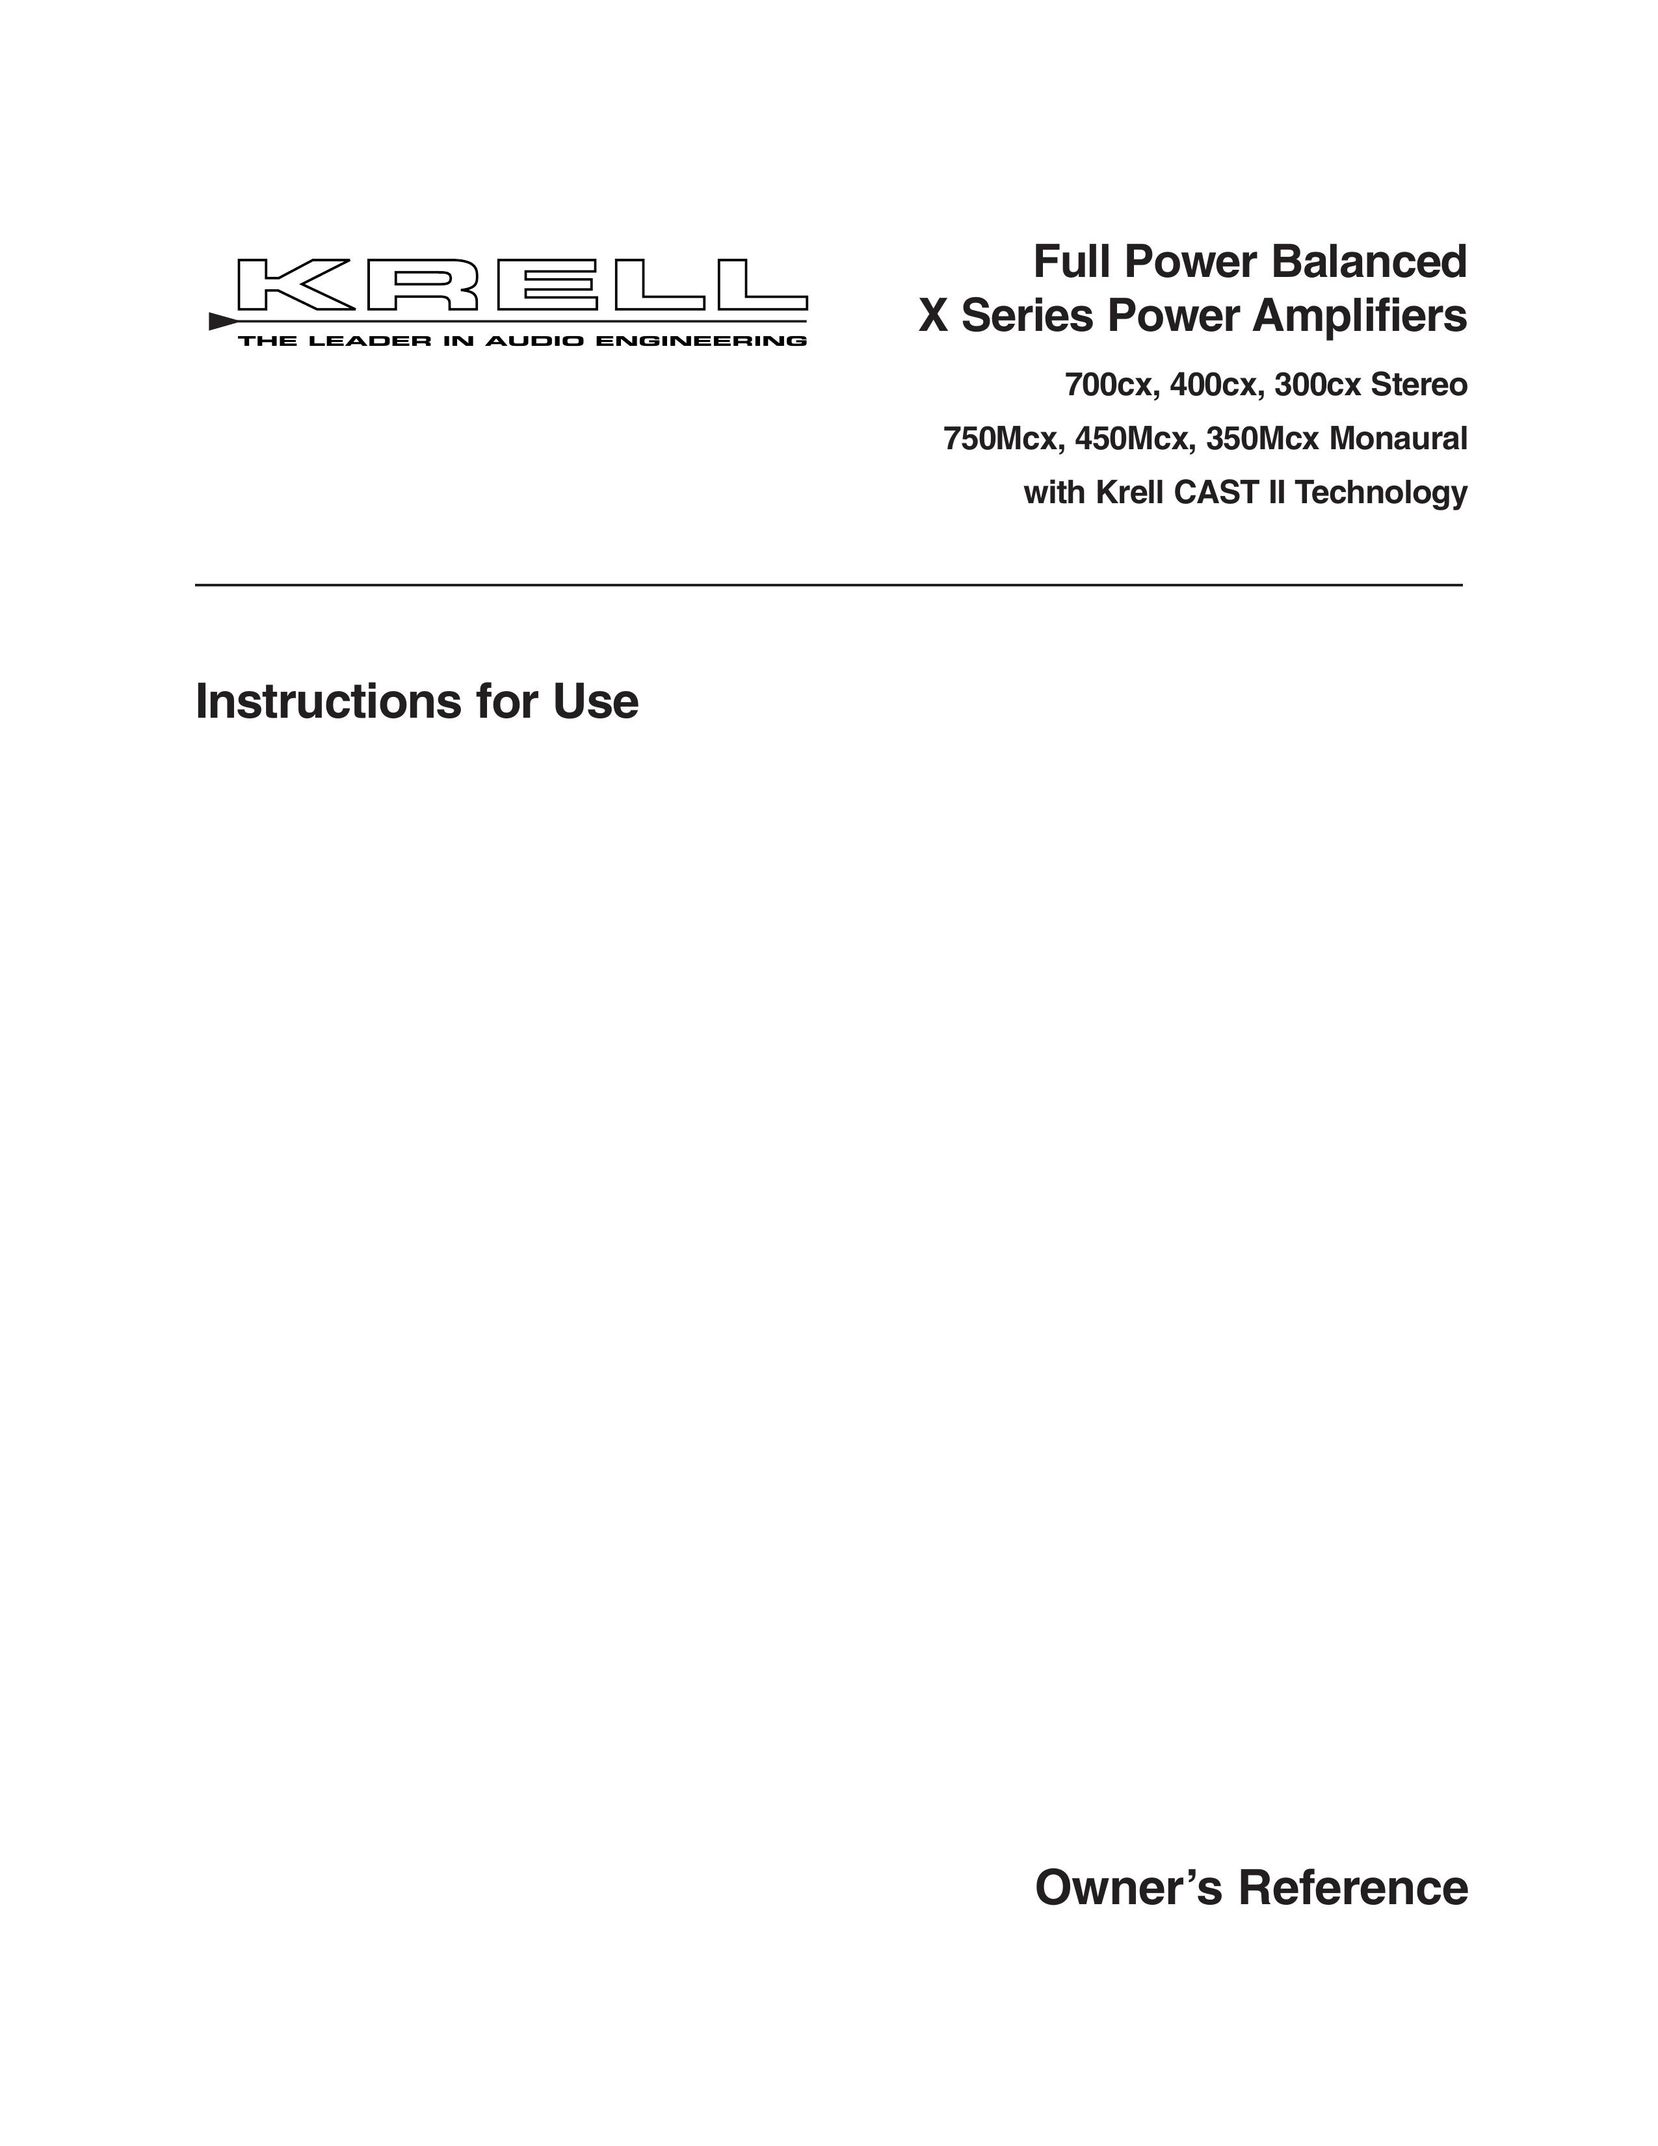 Krell Industries 700cx Stereo Amplifier User Manual